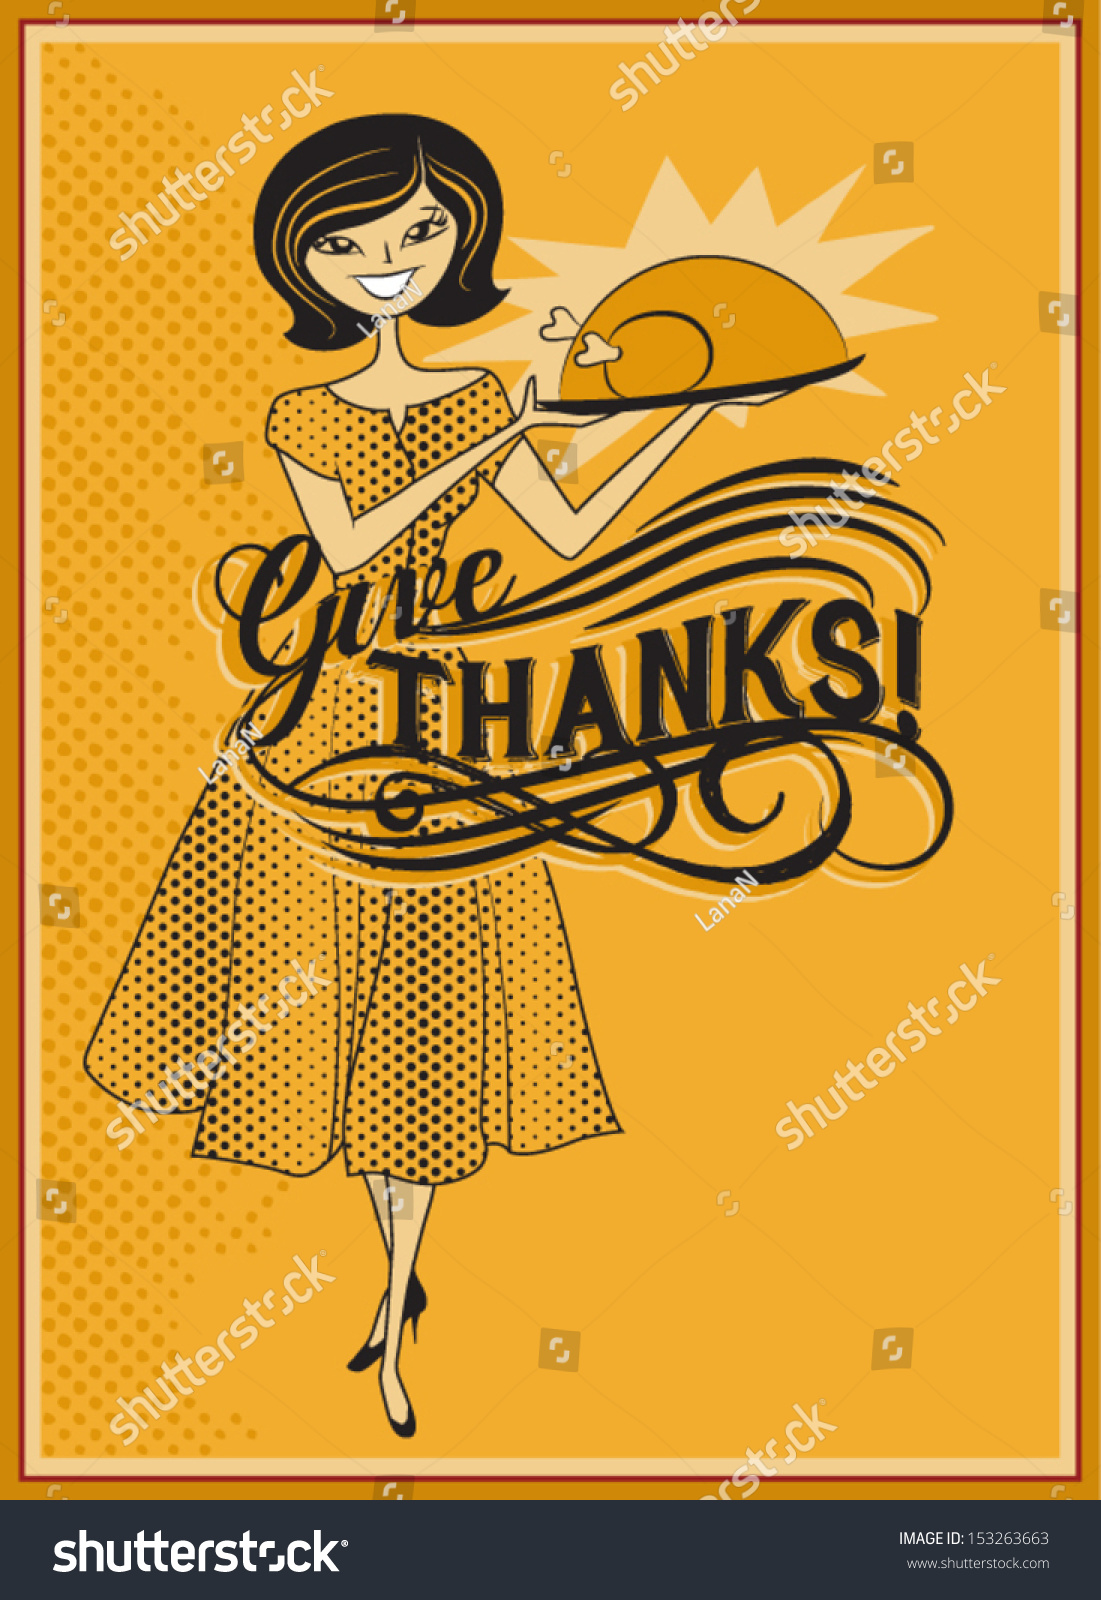 SVG of Give Thanks - Retro style Thanksgiving ad, with hostess offering turkey roast svg